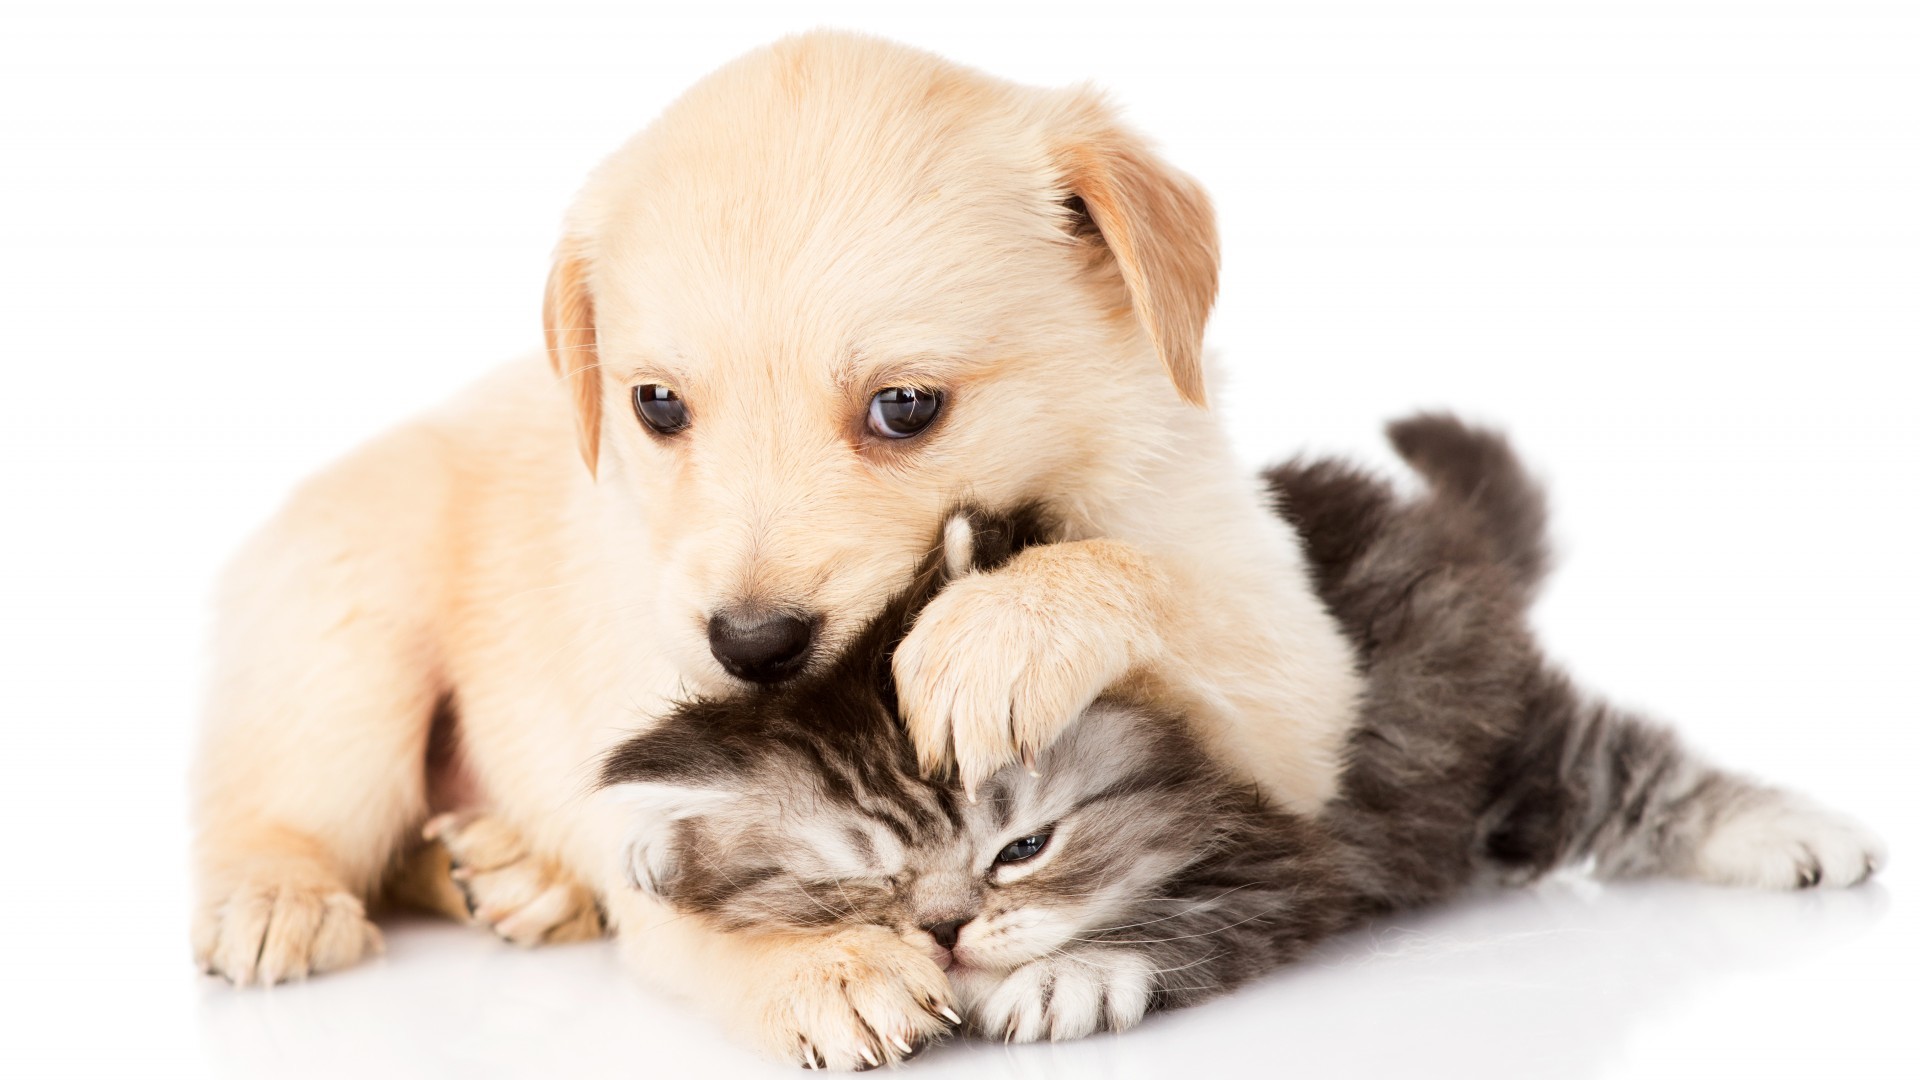 Cute Puppy and Kitten Wallpapers (58+ images)